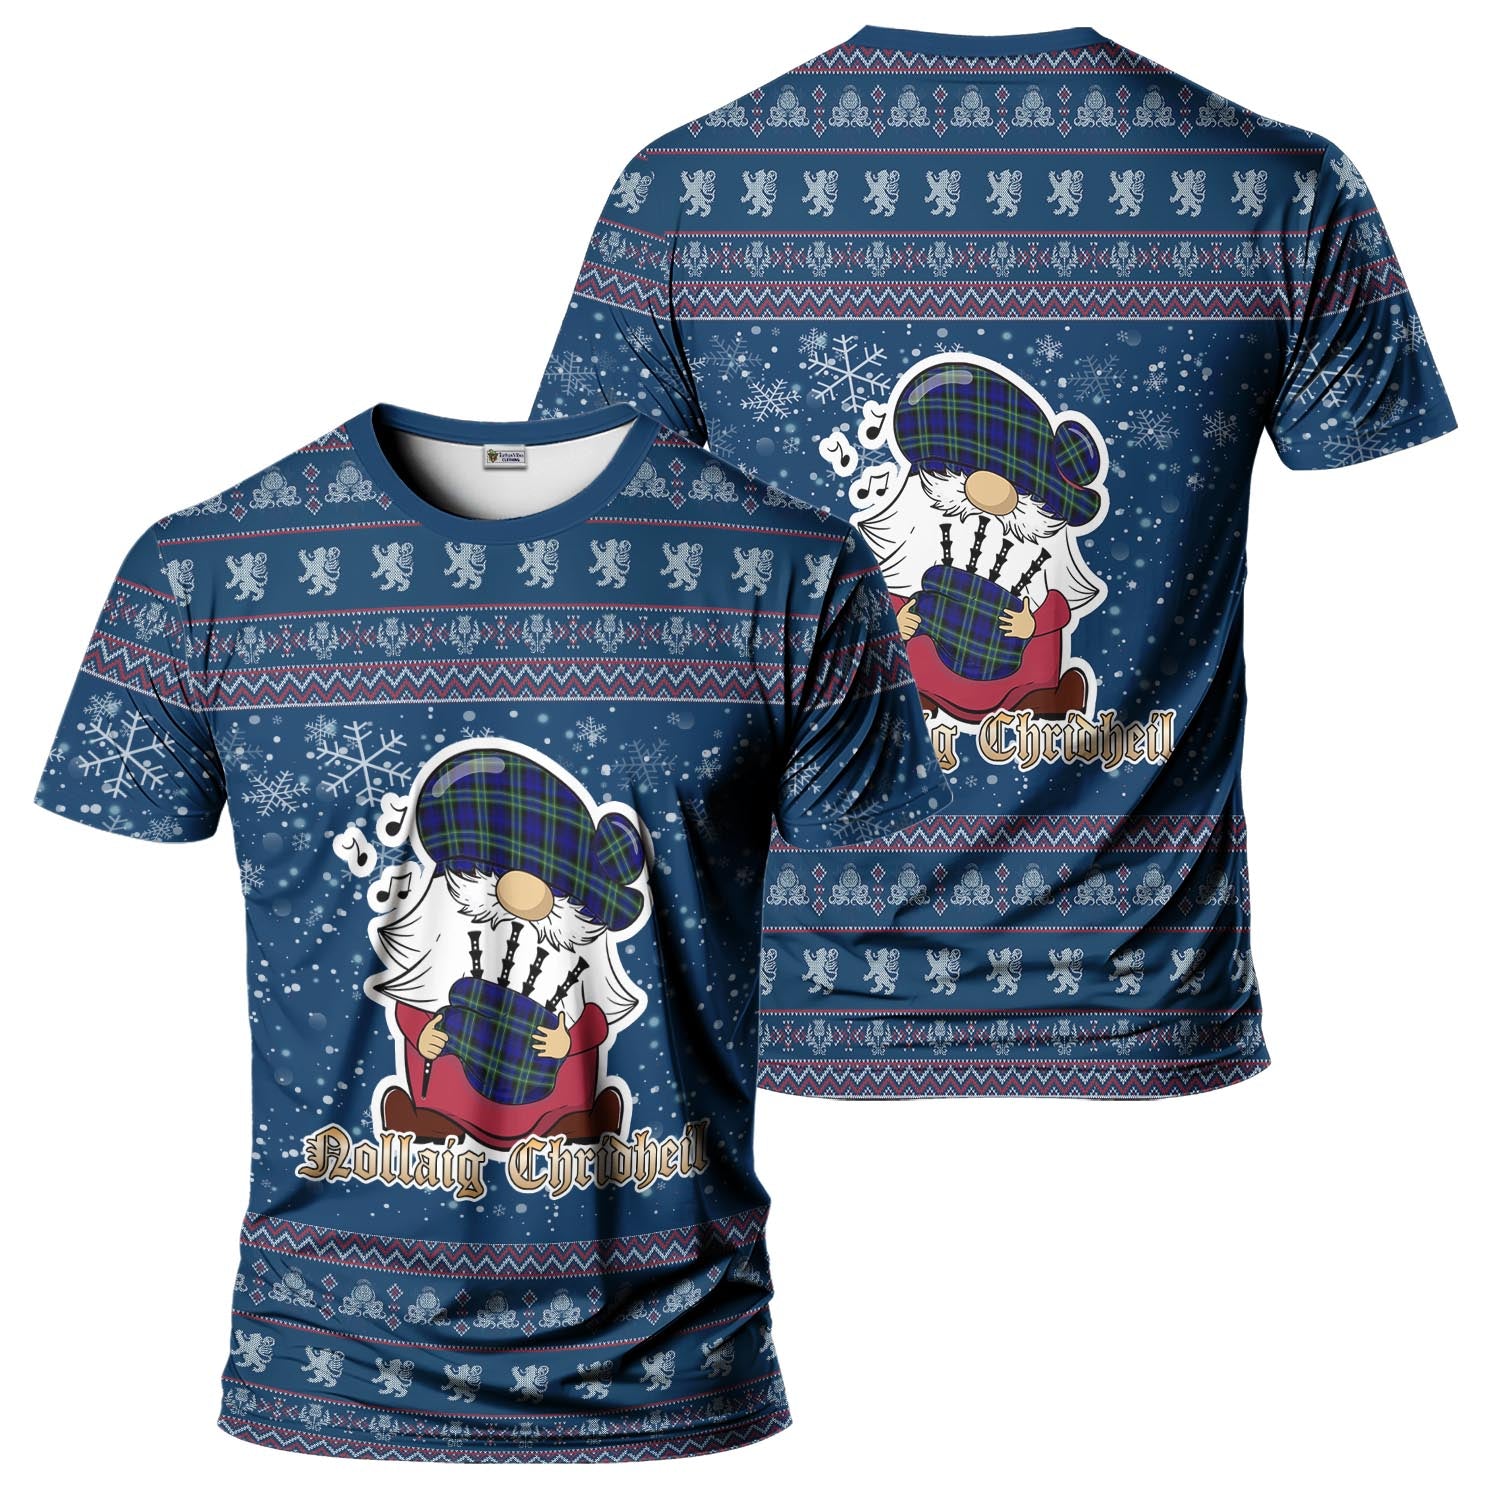 Arbuthnot Modern Clan Christmas Family T-Shirt with Funny Gnome Playing Bagpipes Kid's Shirt Blue - Tartanvibesclothing